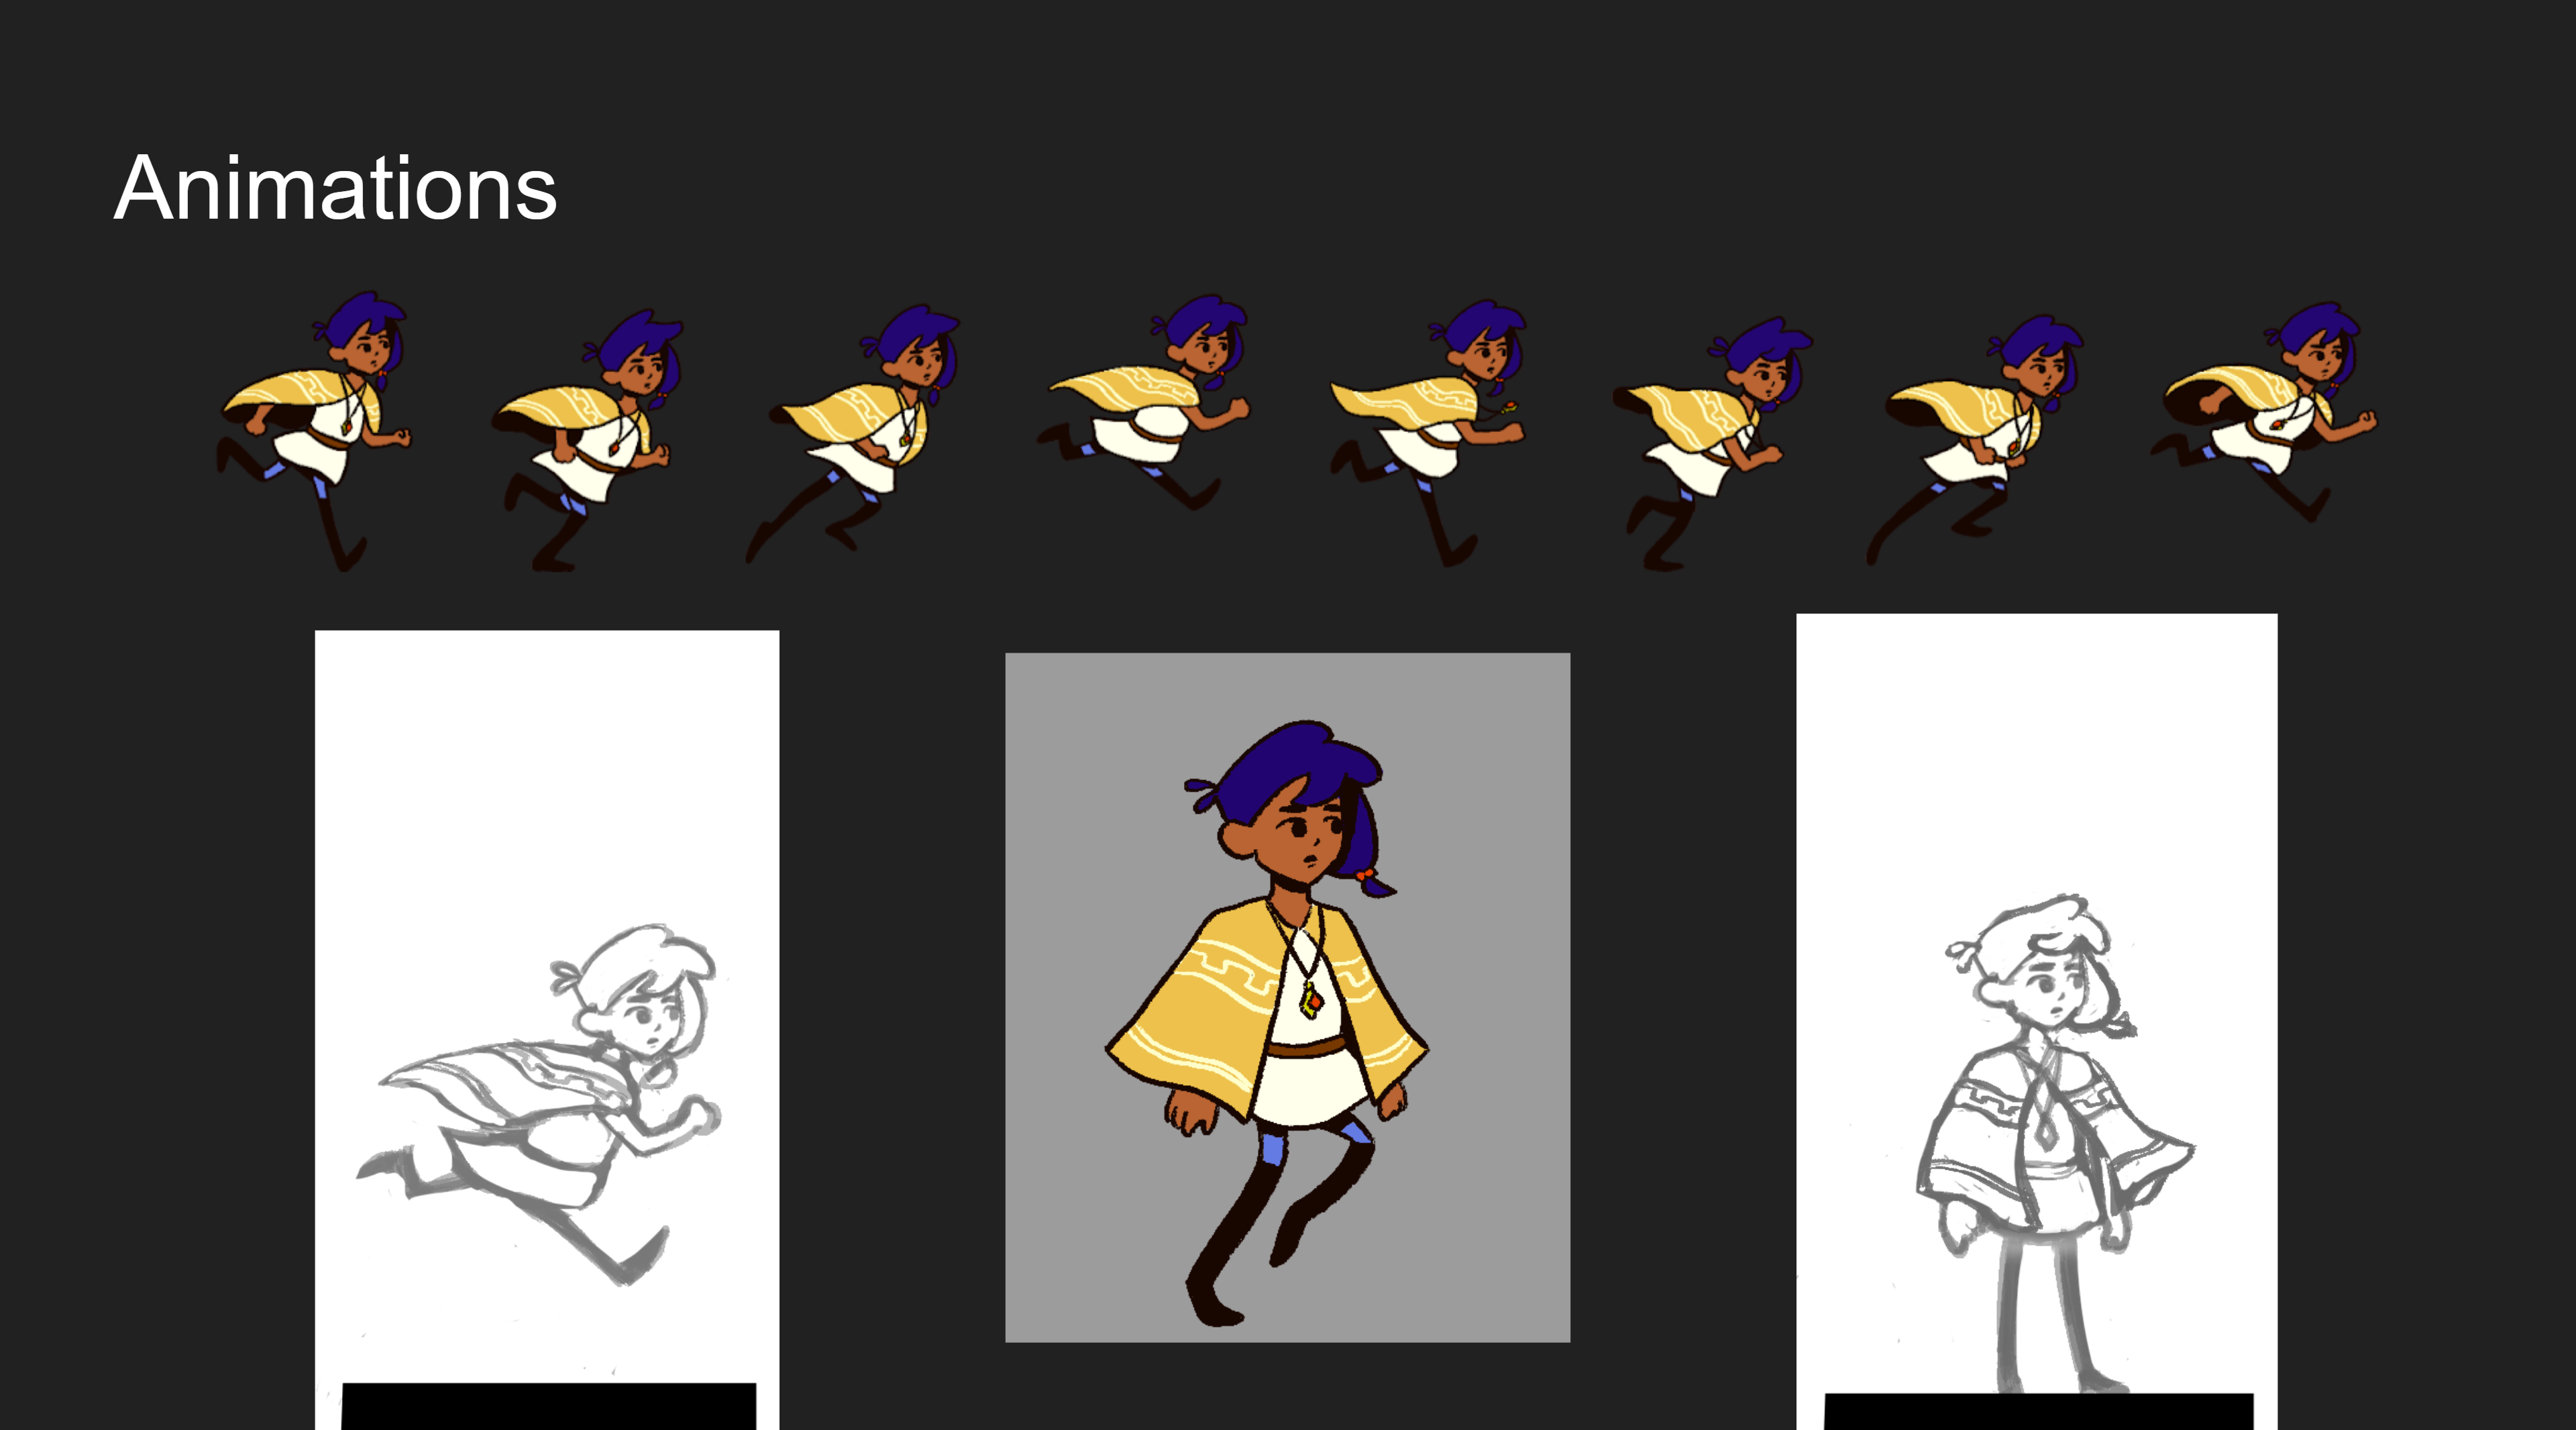 Character art and 'run cycle' keyframes for Mason, the player character in Mason and the Elegy of Time. Mason is wearing a yellow poncho, has blue hair and a white tunic in the most completed image.